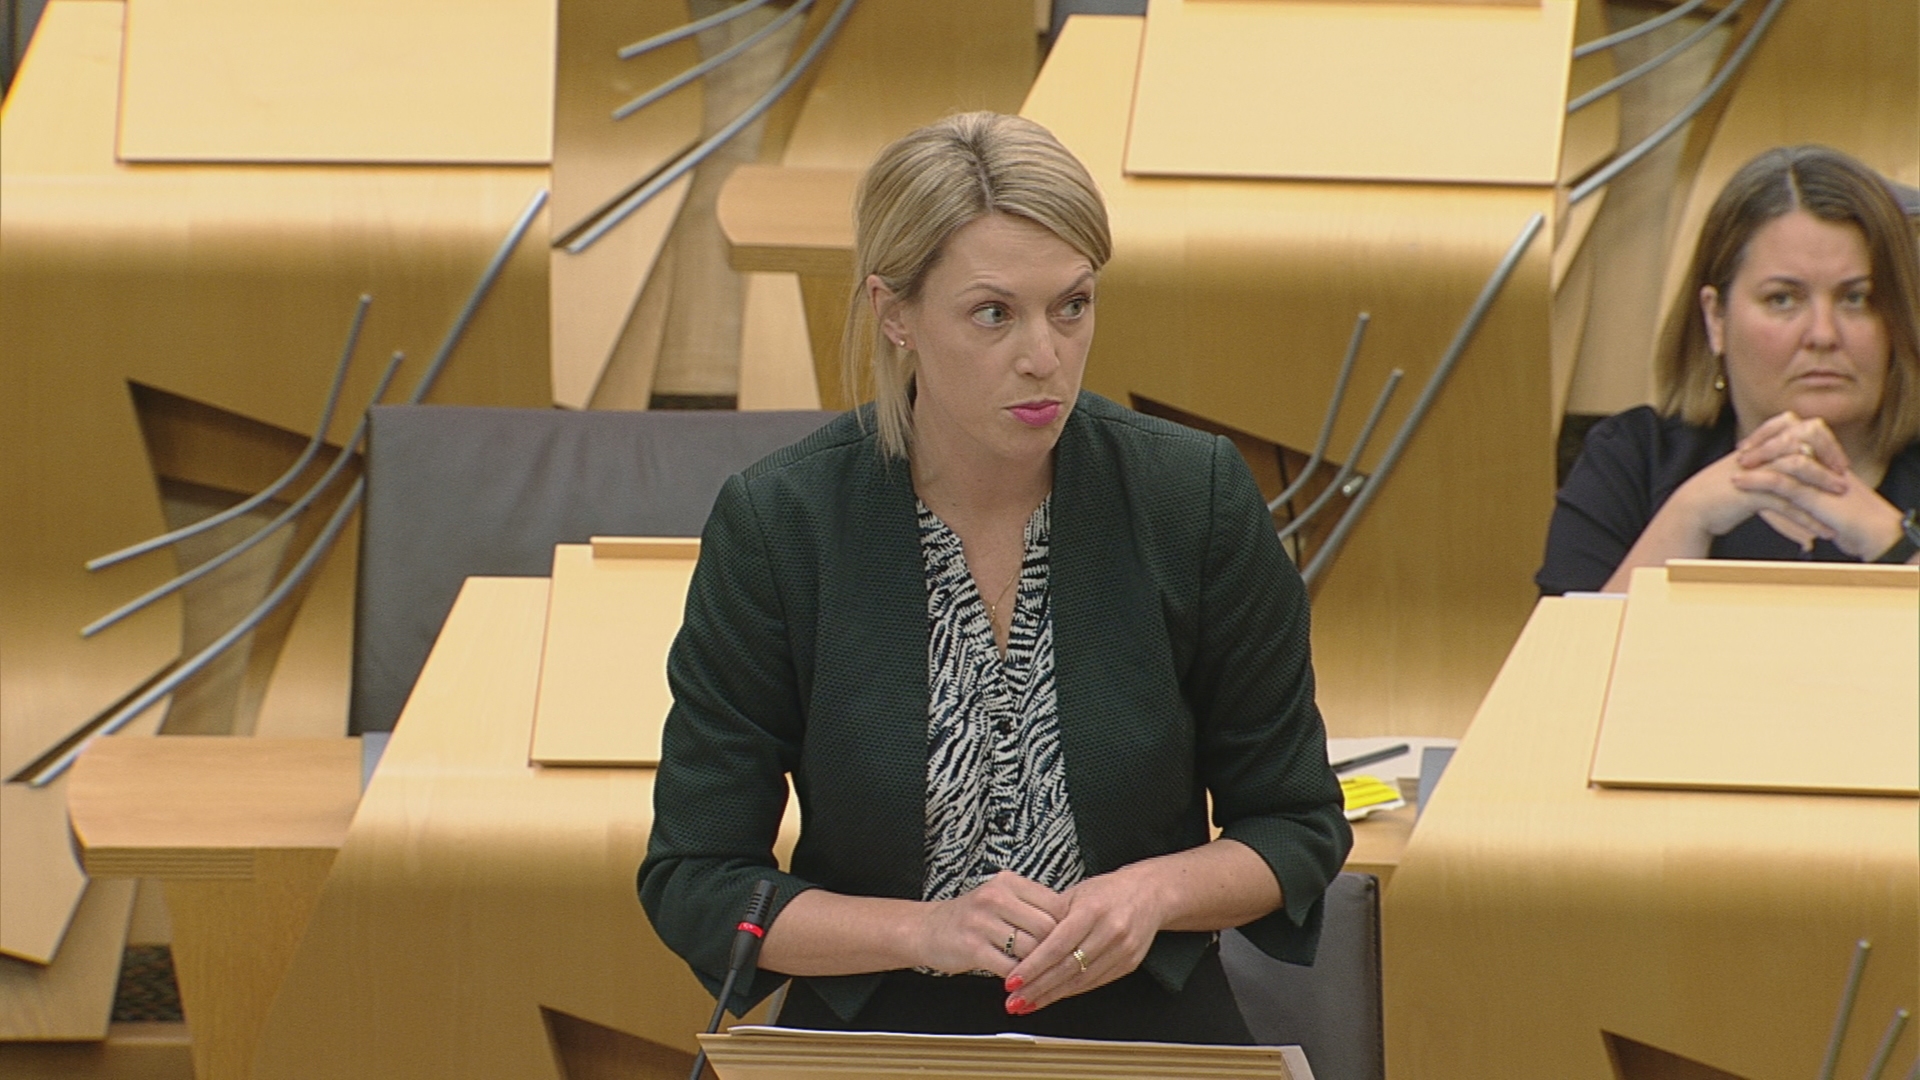 The transport minister said that timetabling for the match had been 'incredibly difficult'. (Scottish Parliament TV)